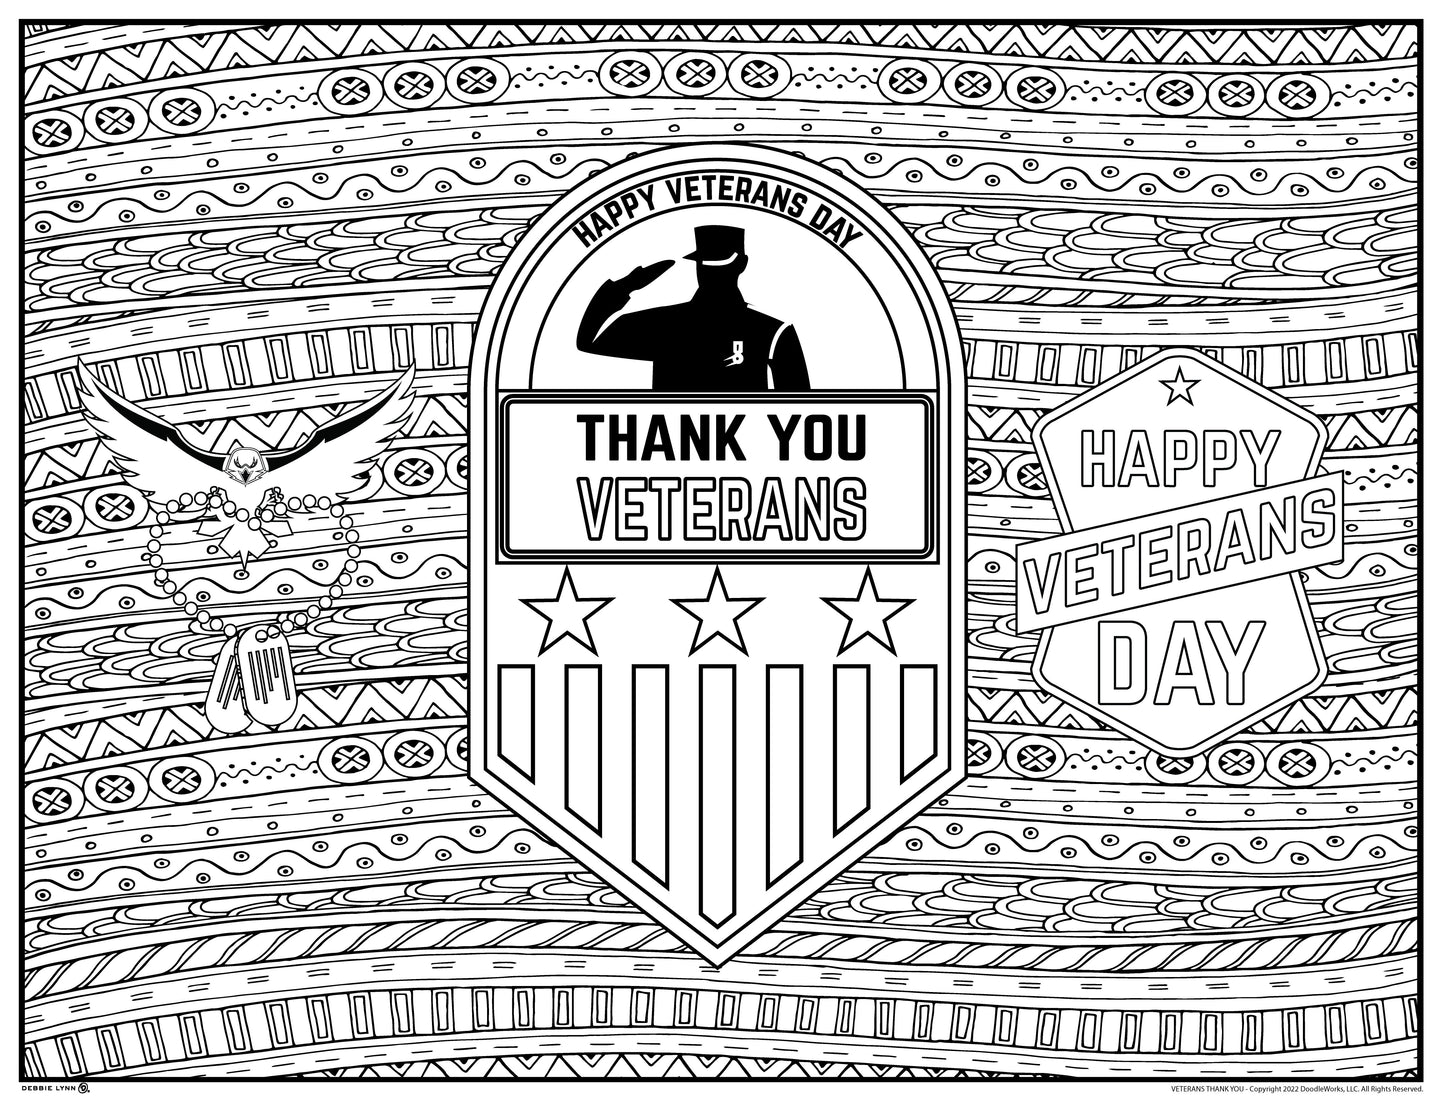 Veterans Thank You Personalized Giant Coloring Poster 46"x60"